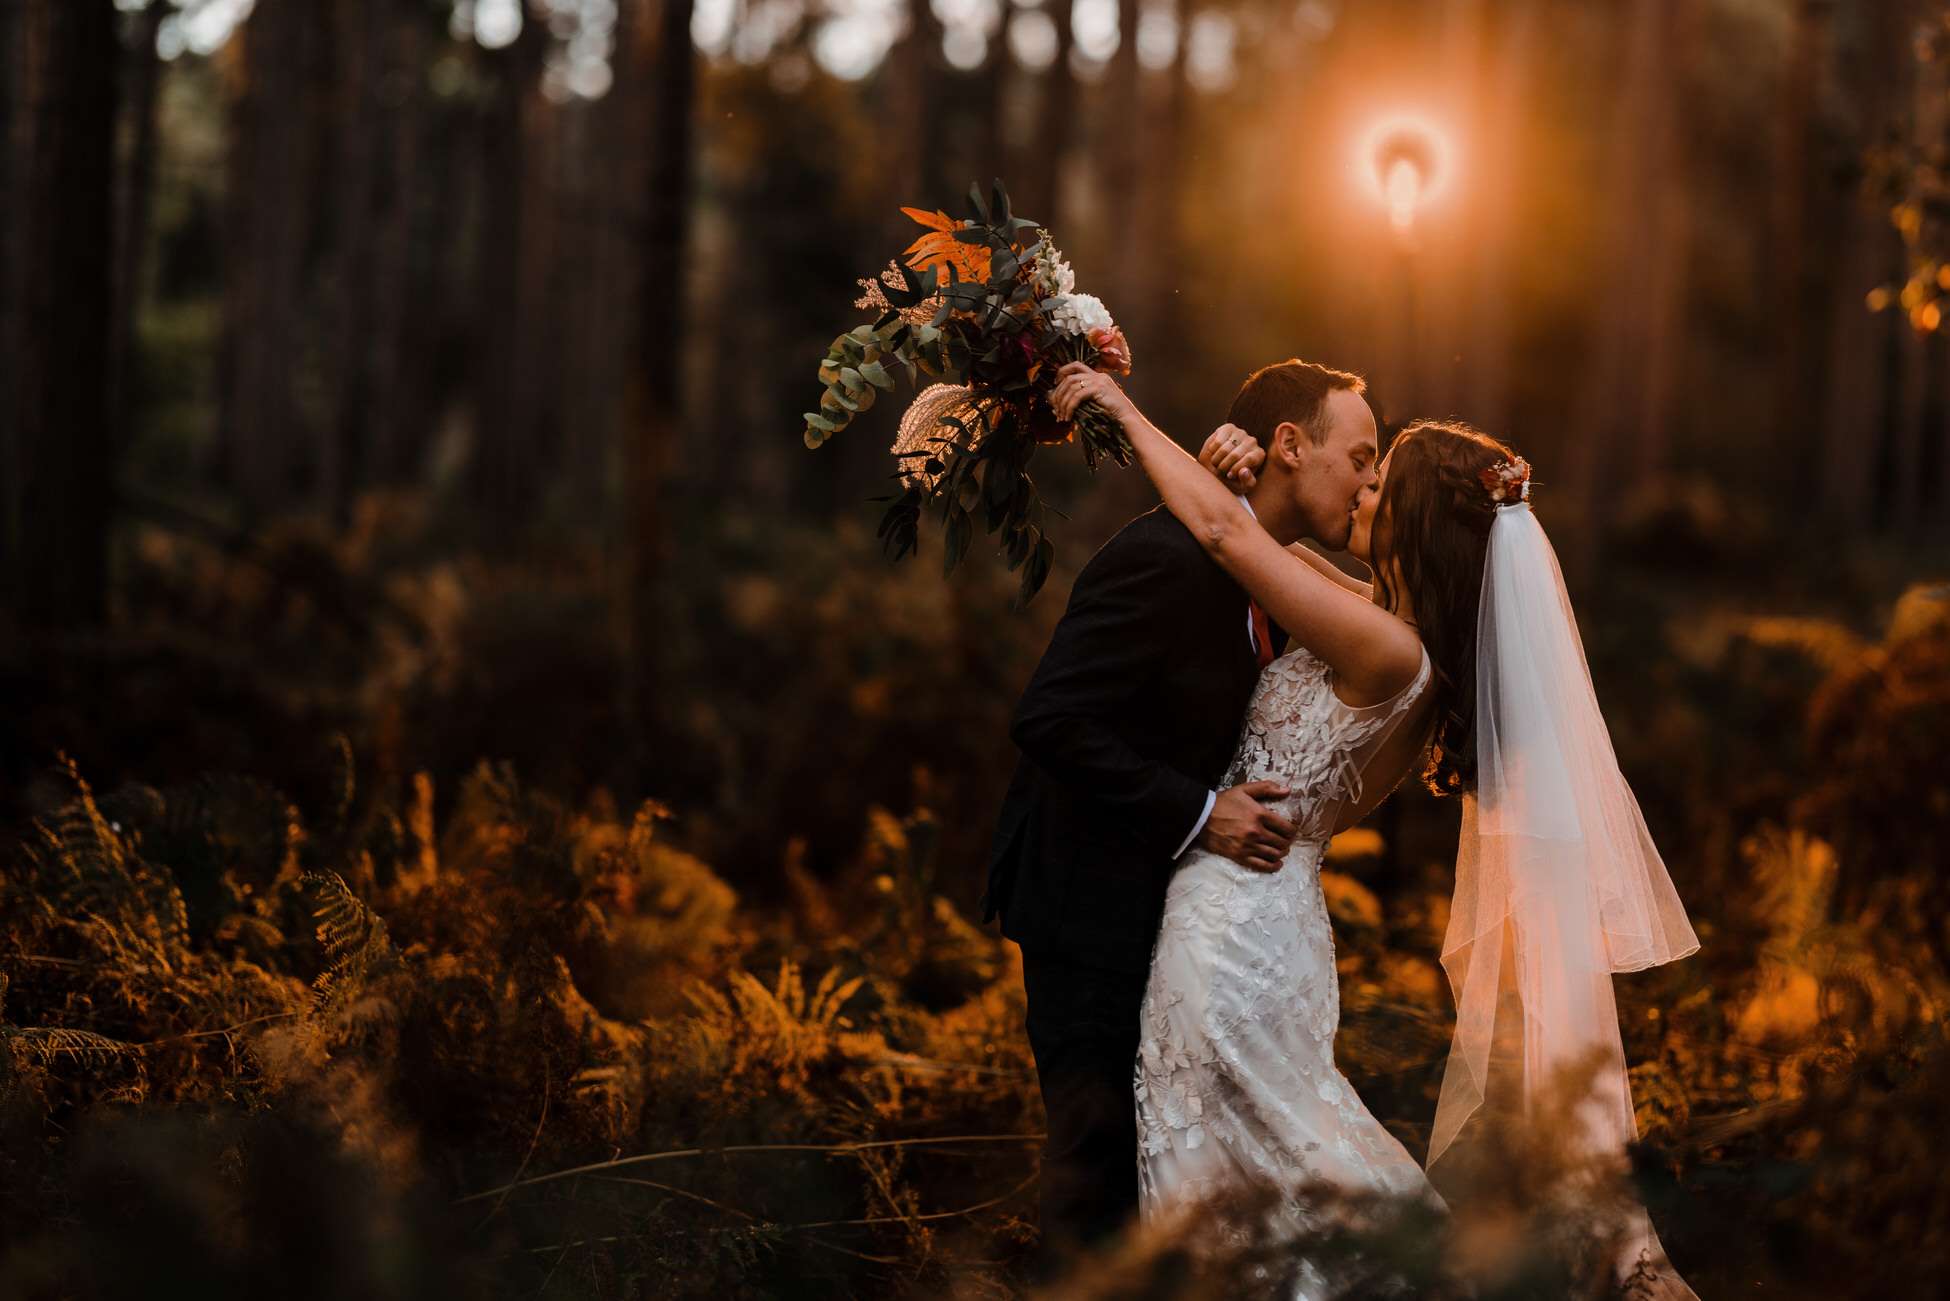 What are the key factors to consider when choosing a wedding photographer?